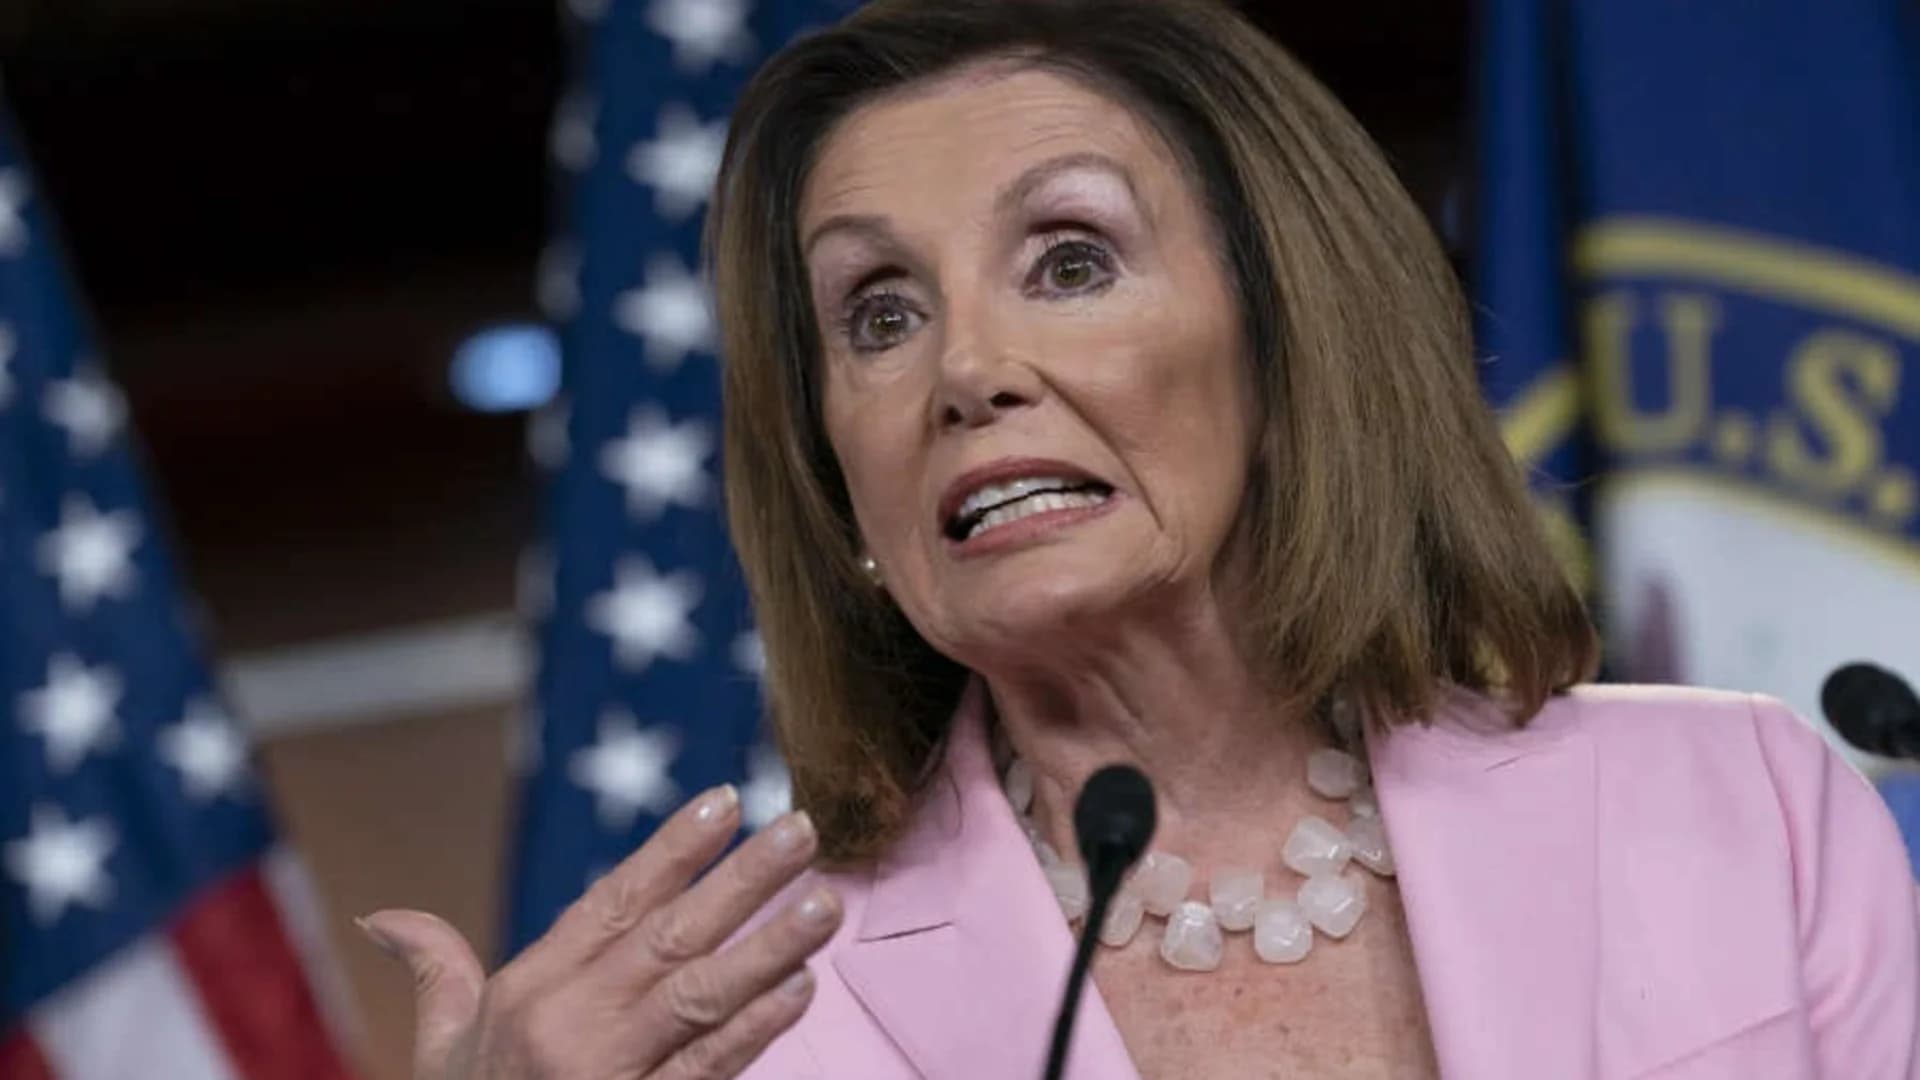 Is it impeachment if Speaker Pelosi doesn't say so?